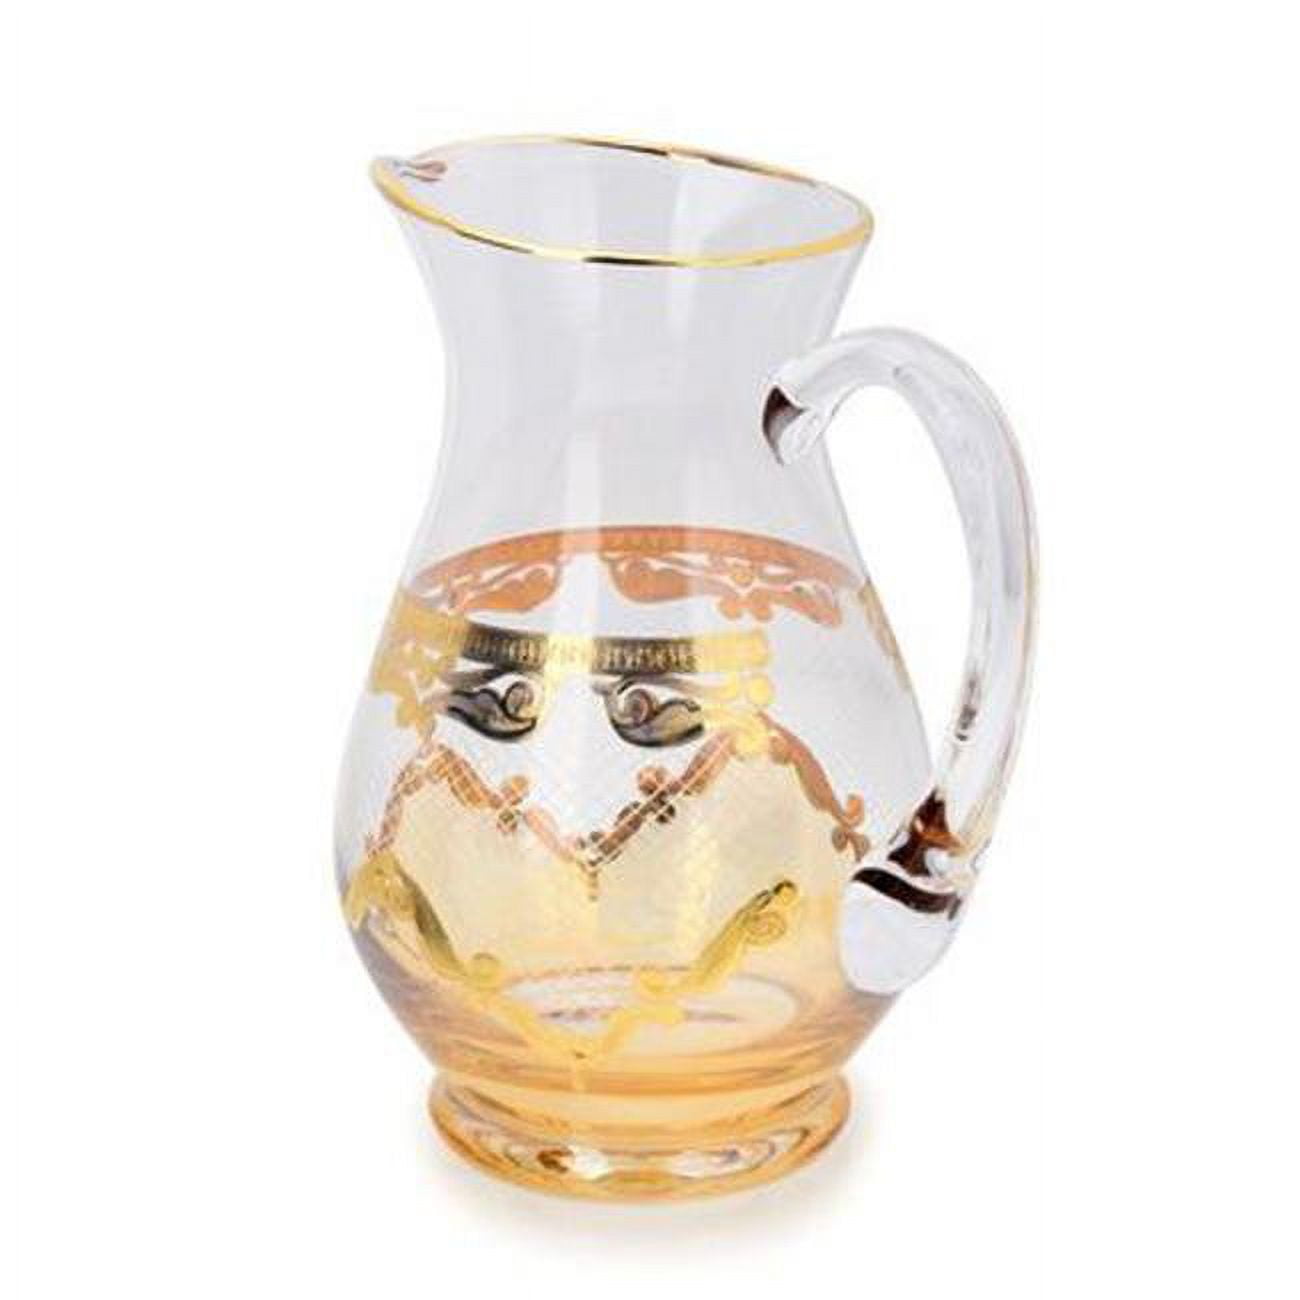 Classic Touch Cja139 9 X 5 In. Pitcher Amber With Diamond Cuts - Rich 24k Gold Artwork